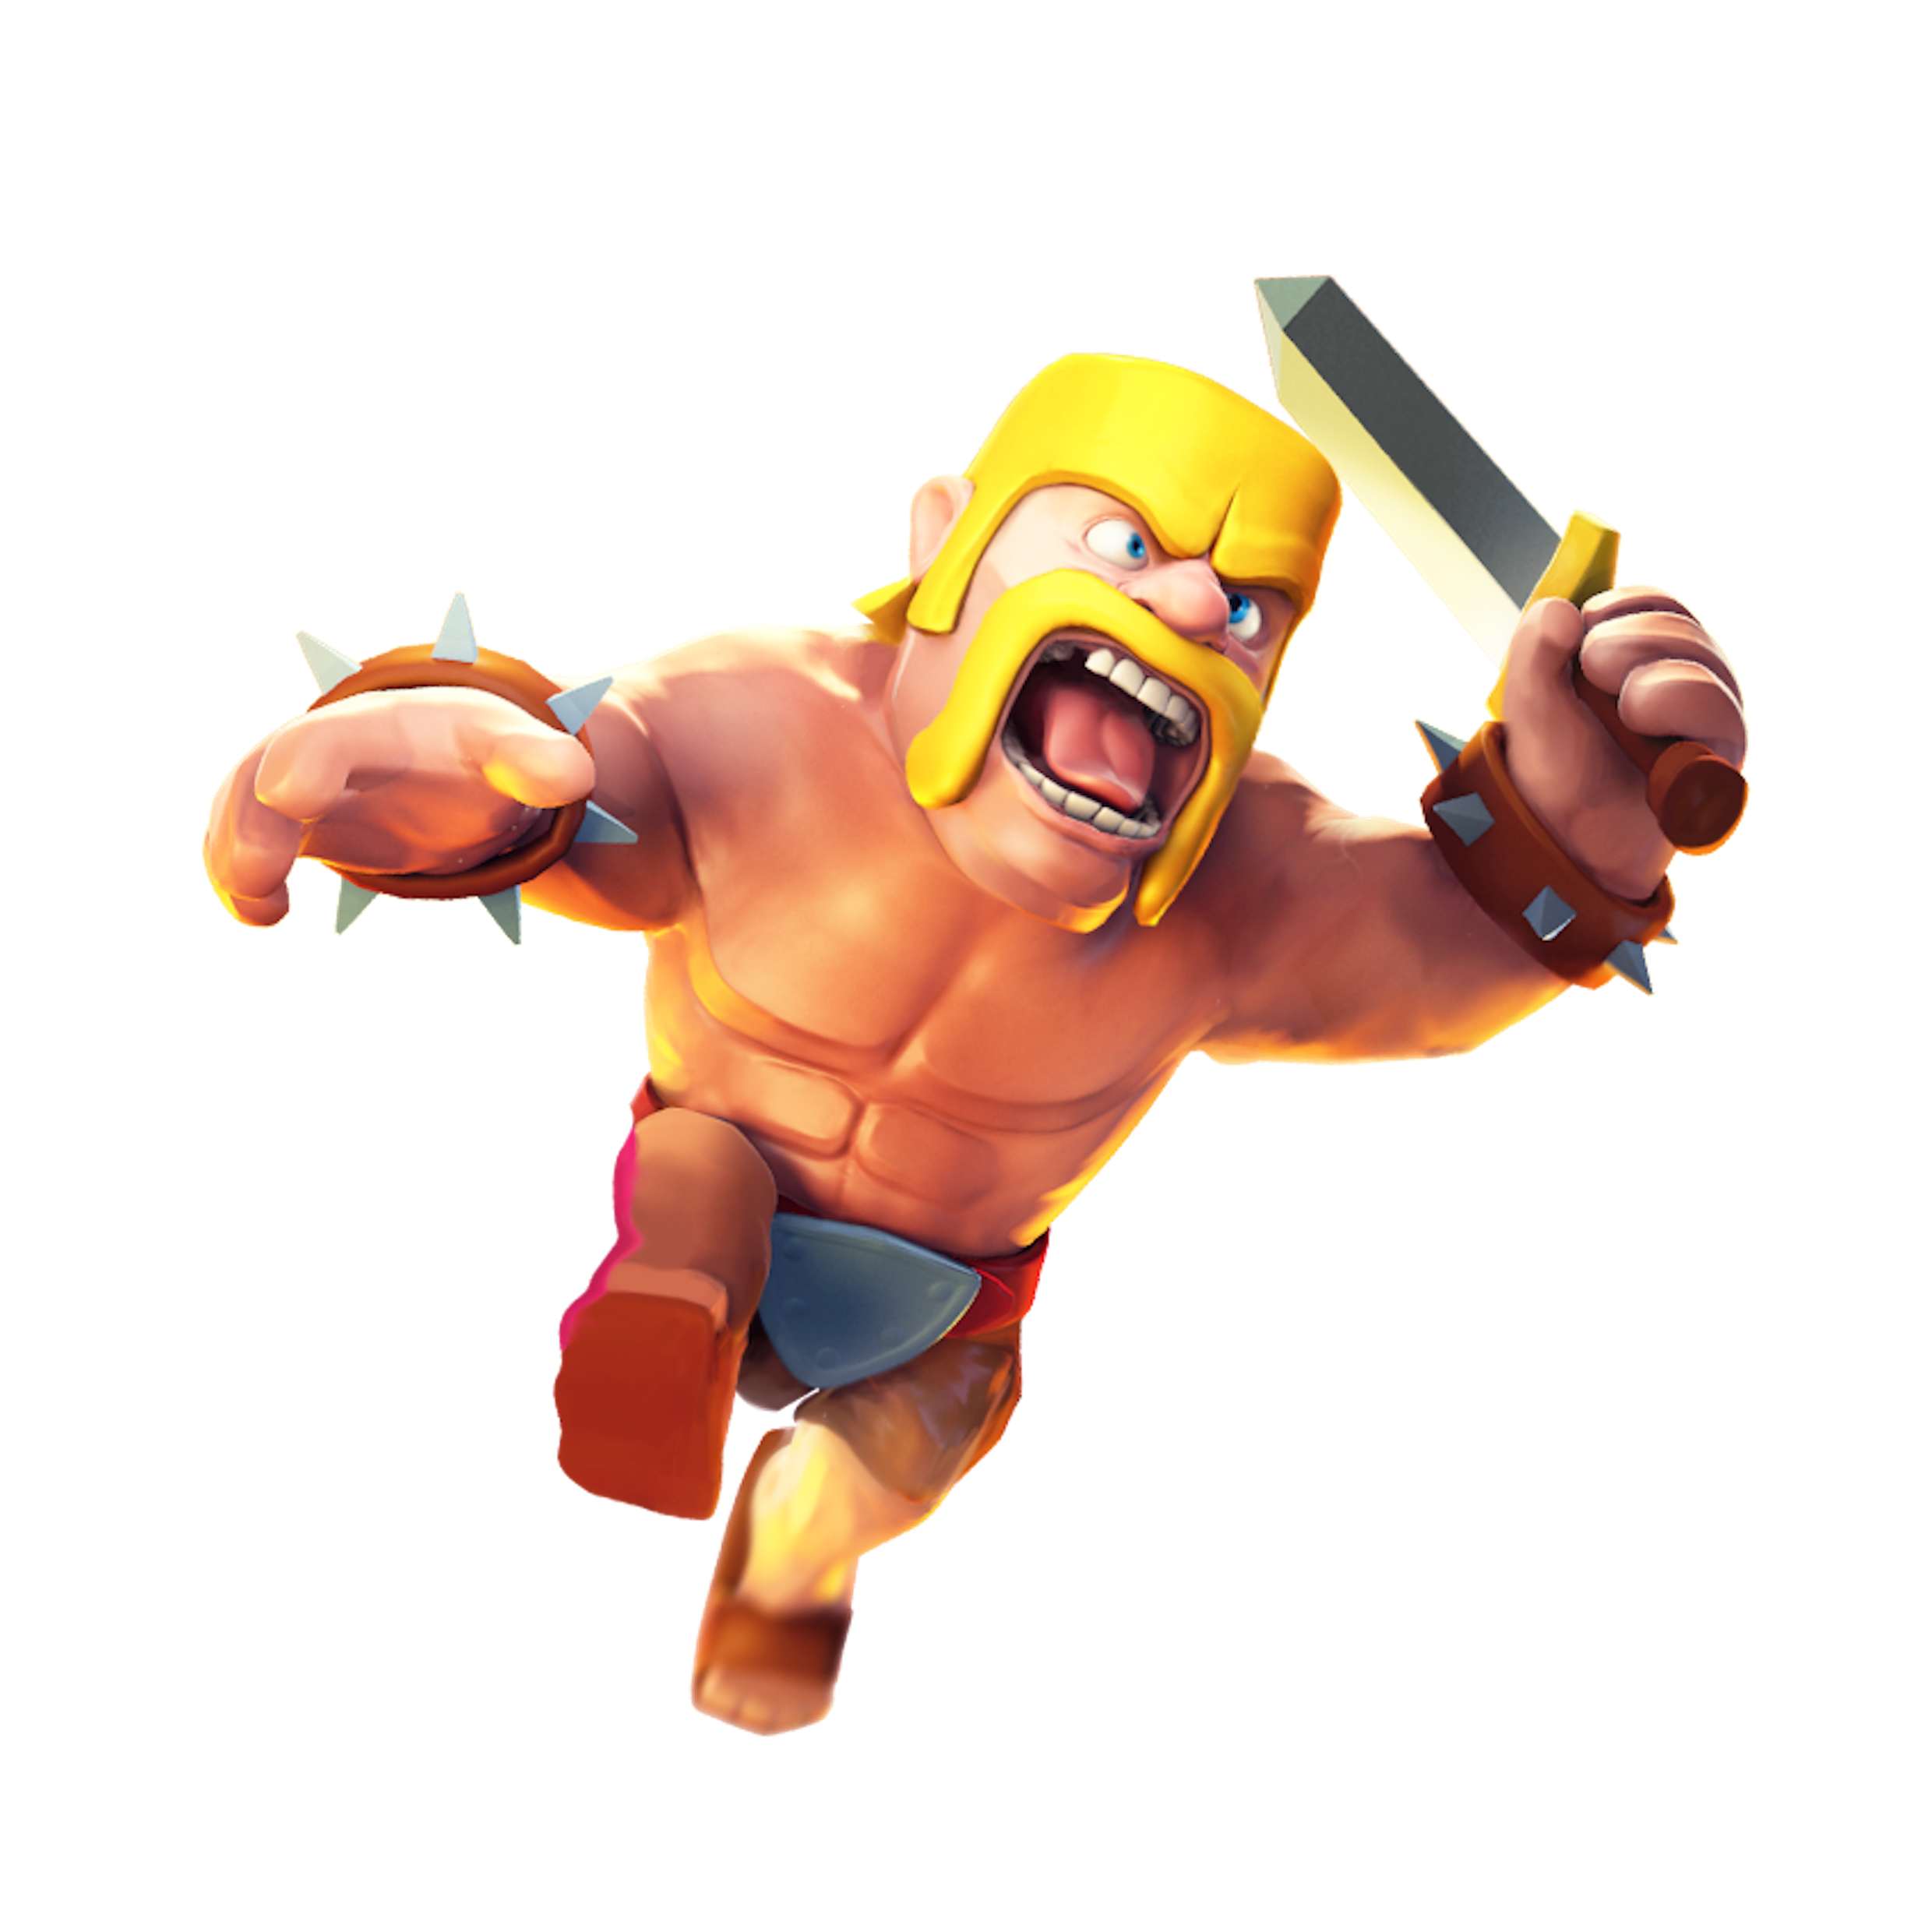 Clash of Clans Transparent Background, Clash Of Clans HD PNG - Free PNG